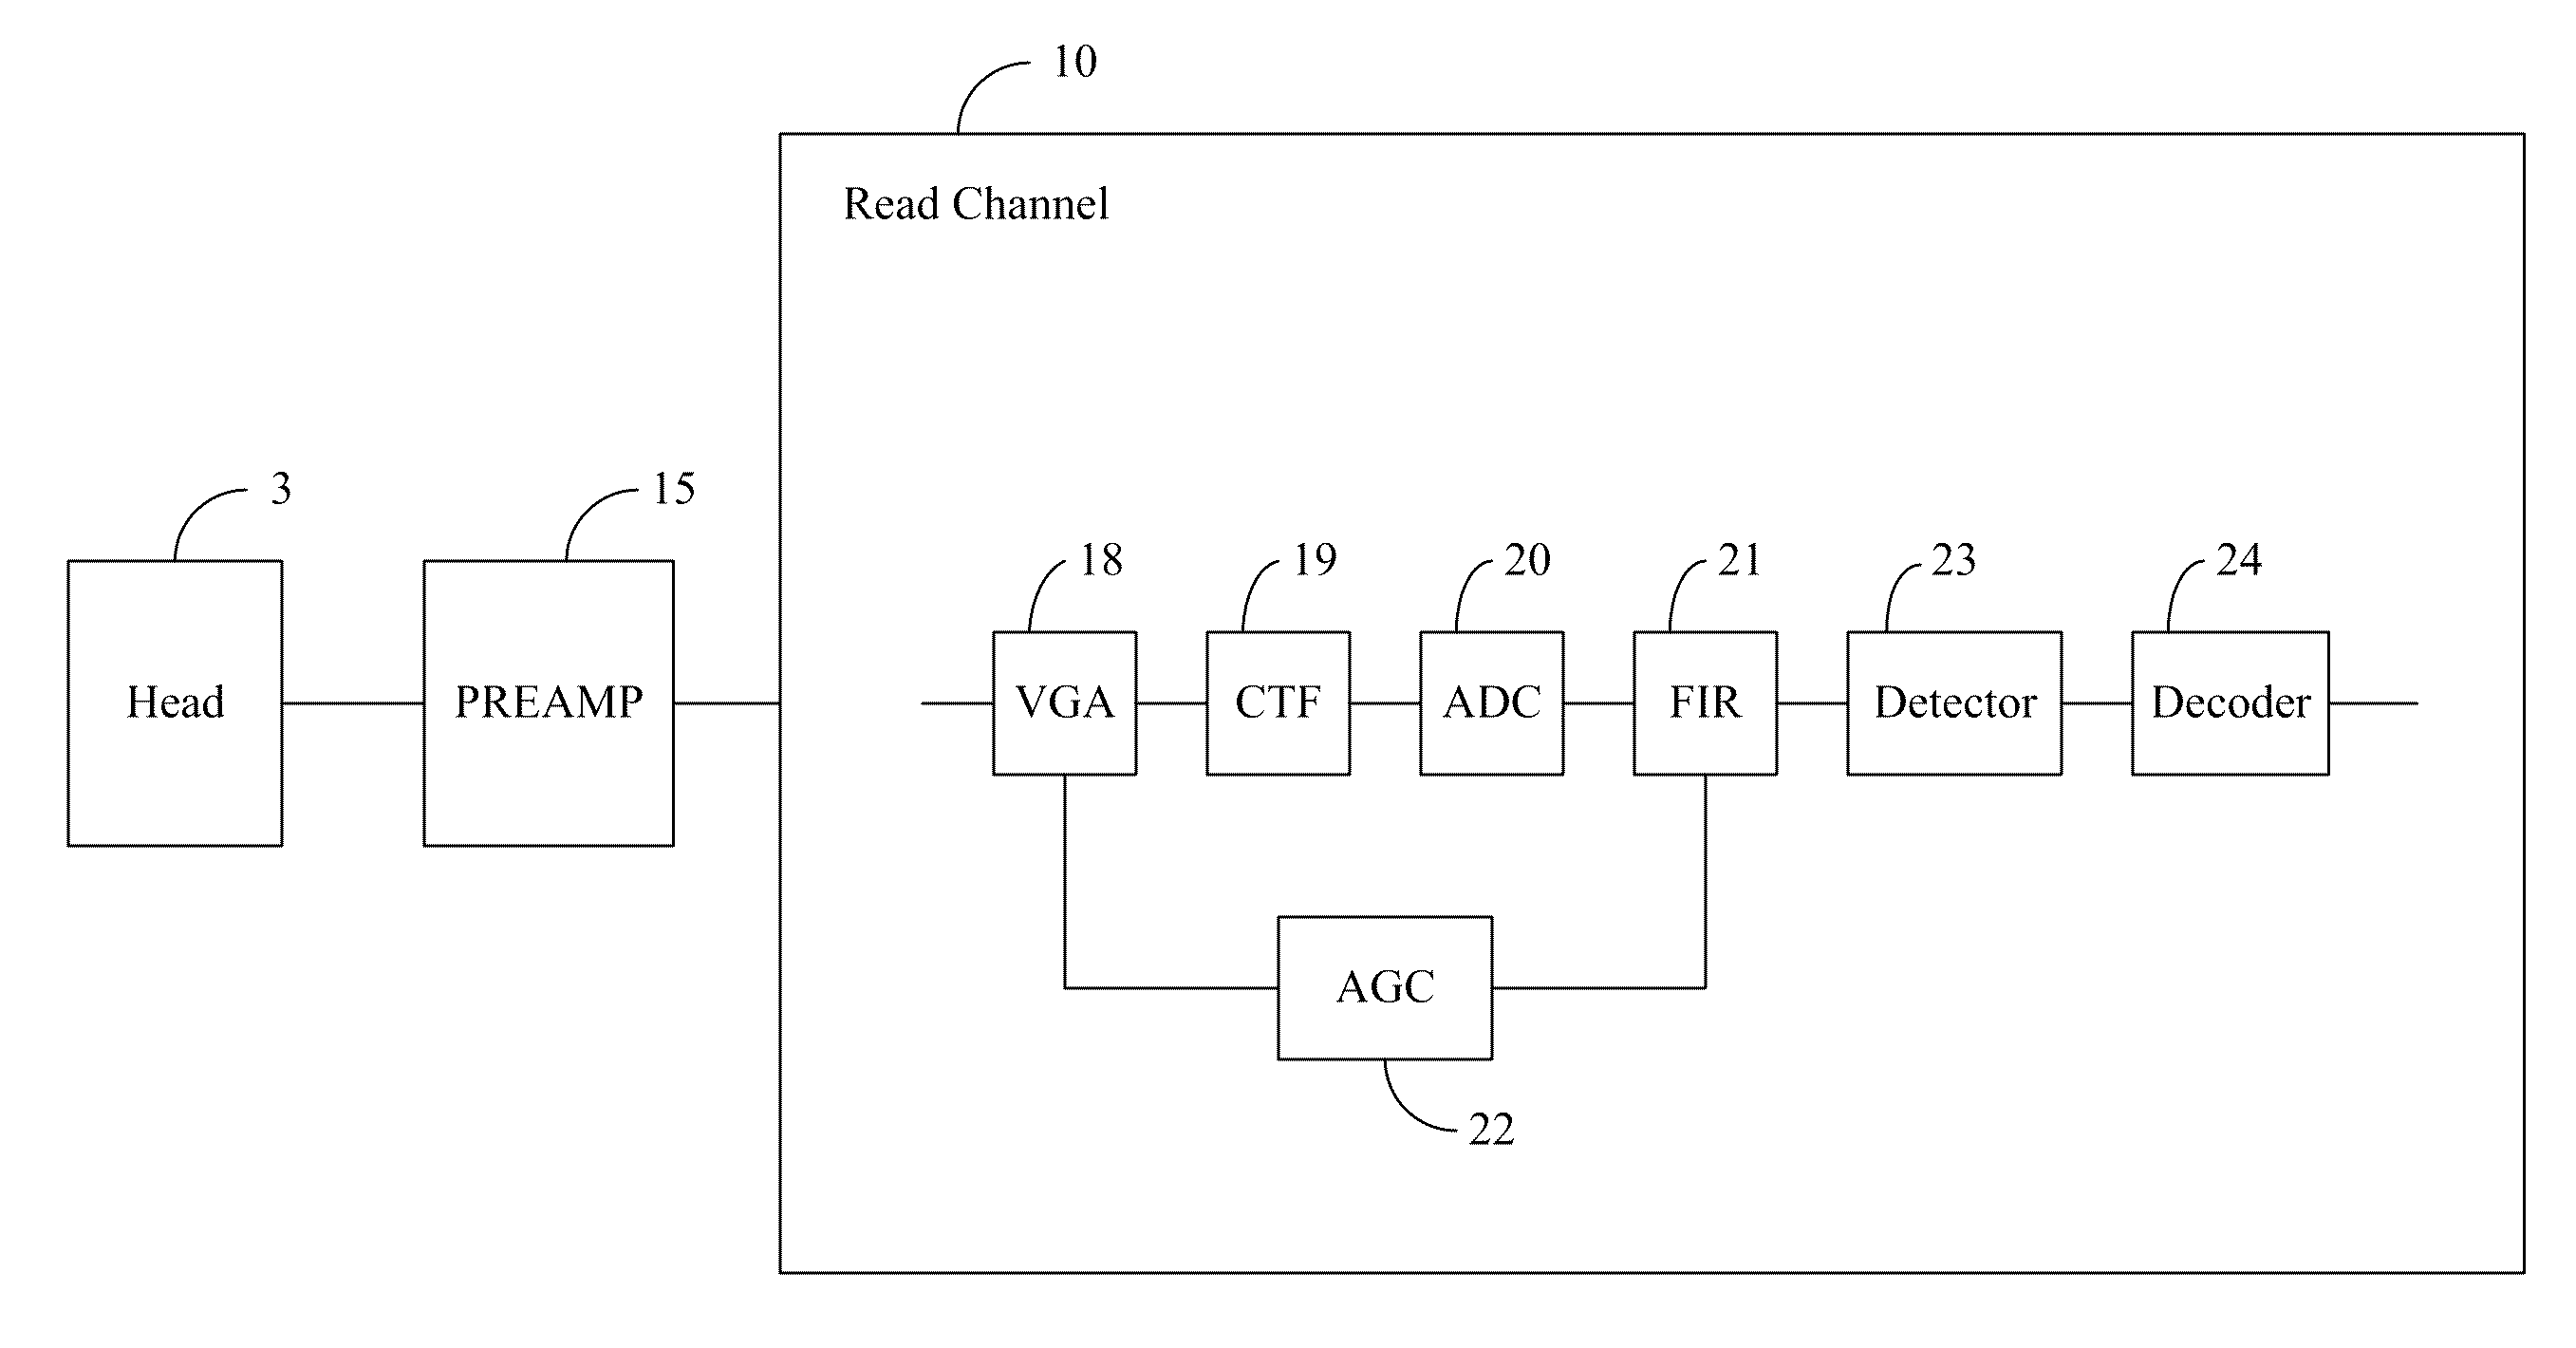 Magnetic storage systems and methods allowing for recovery of data blocks written off-track with non-constant offsets